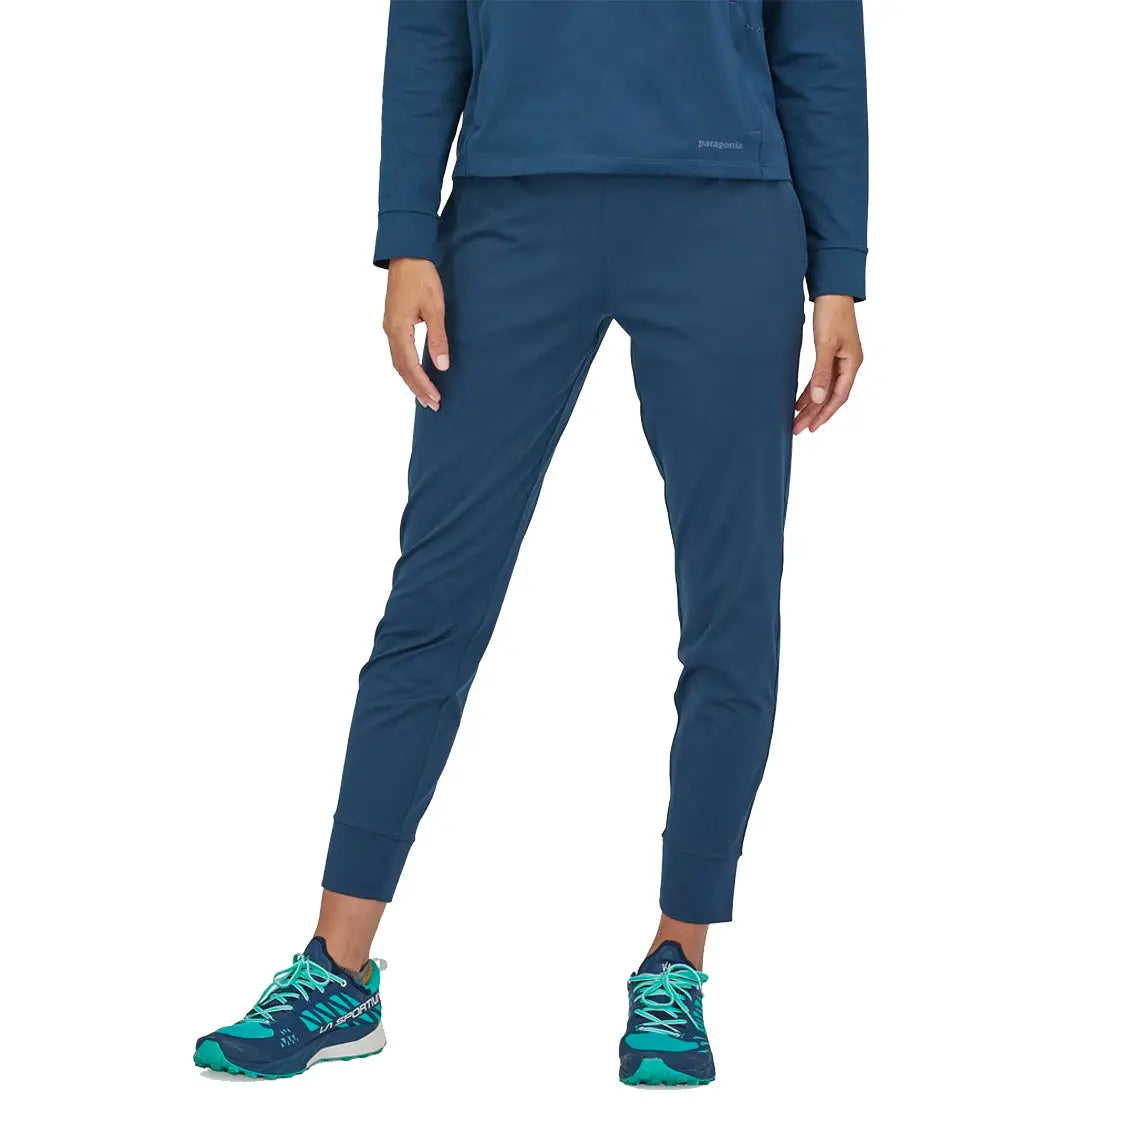 Womens Patagonia Pack Out Joggers - Dark Tidepool / Blue / Dye